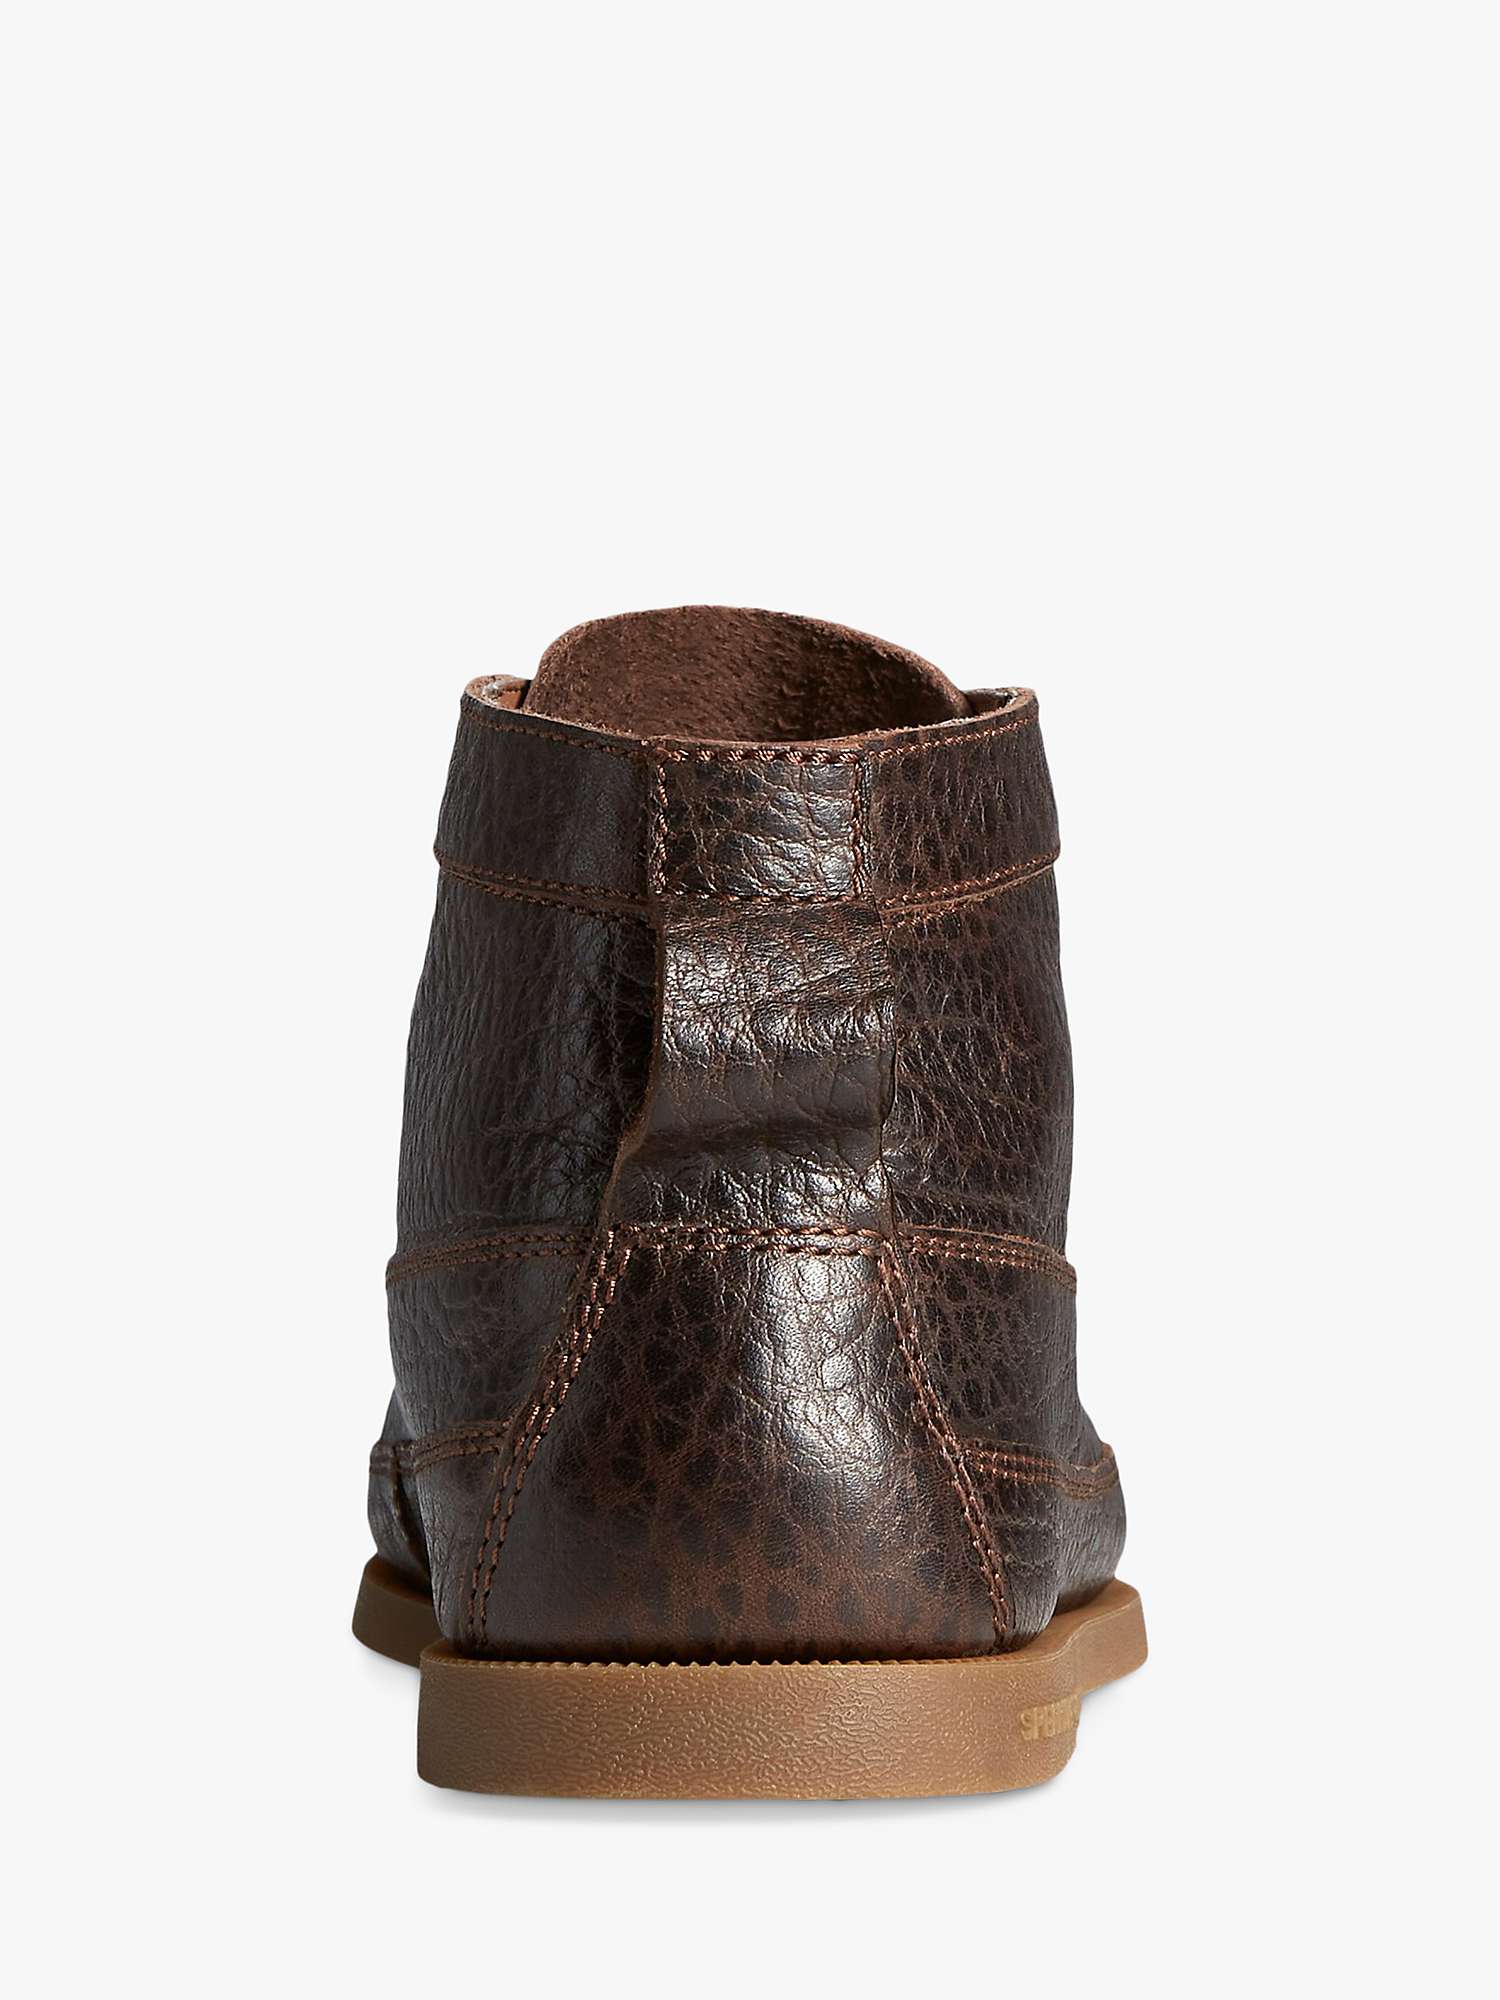 Buy Sperry Authentic Original Tumbled Leather Boat Chukka Boots Online at johnlewis.com